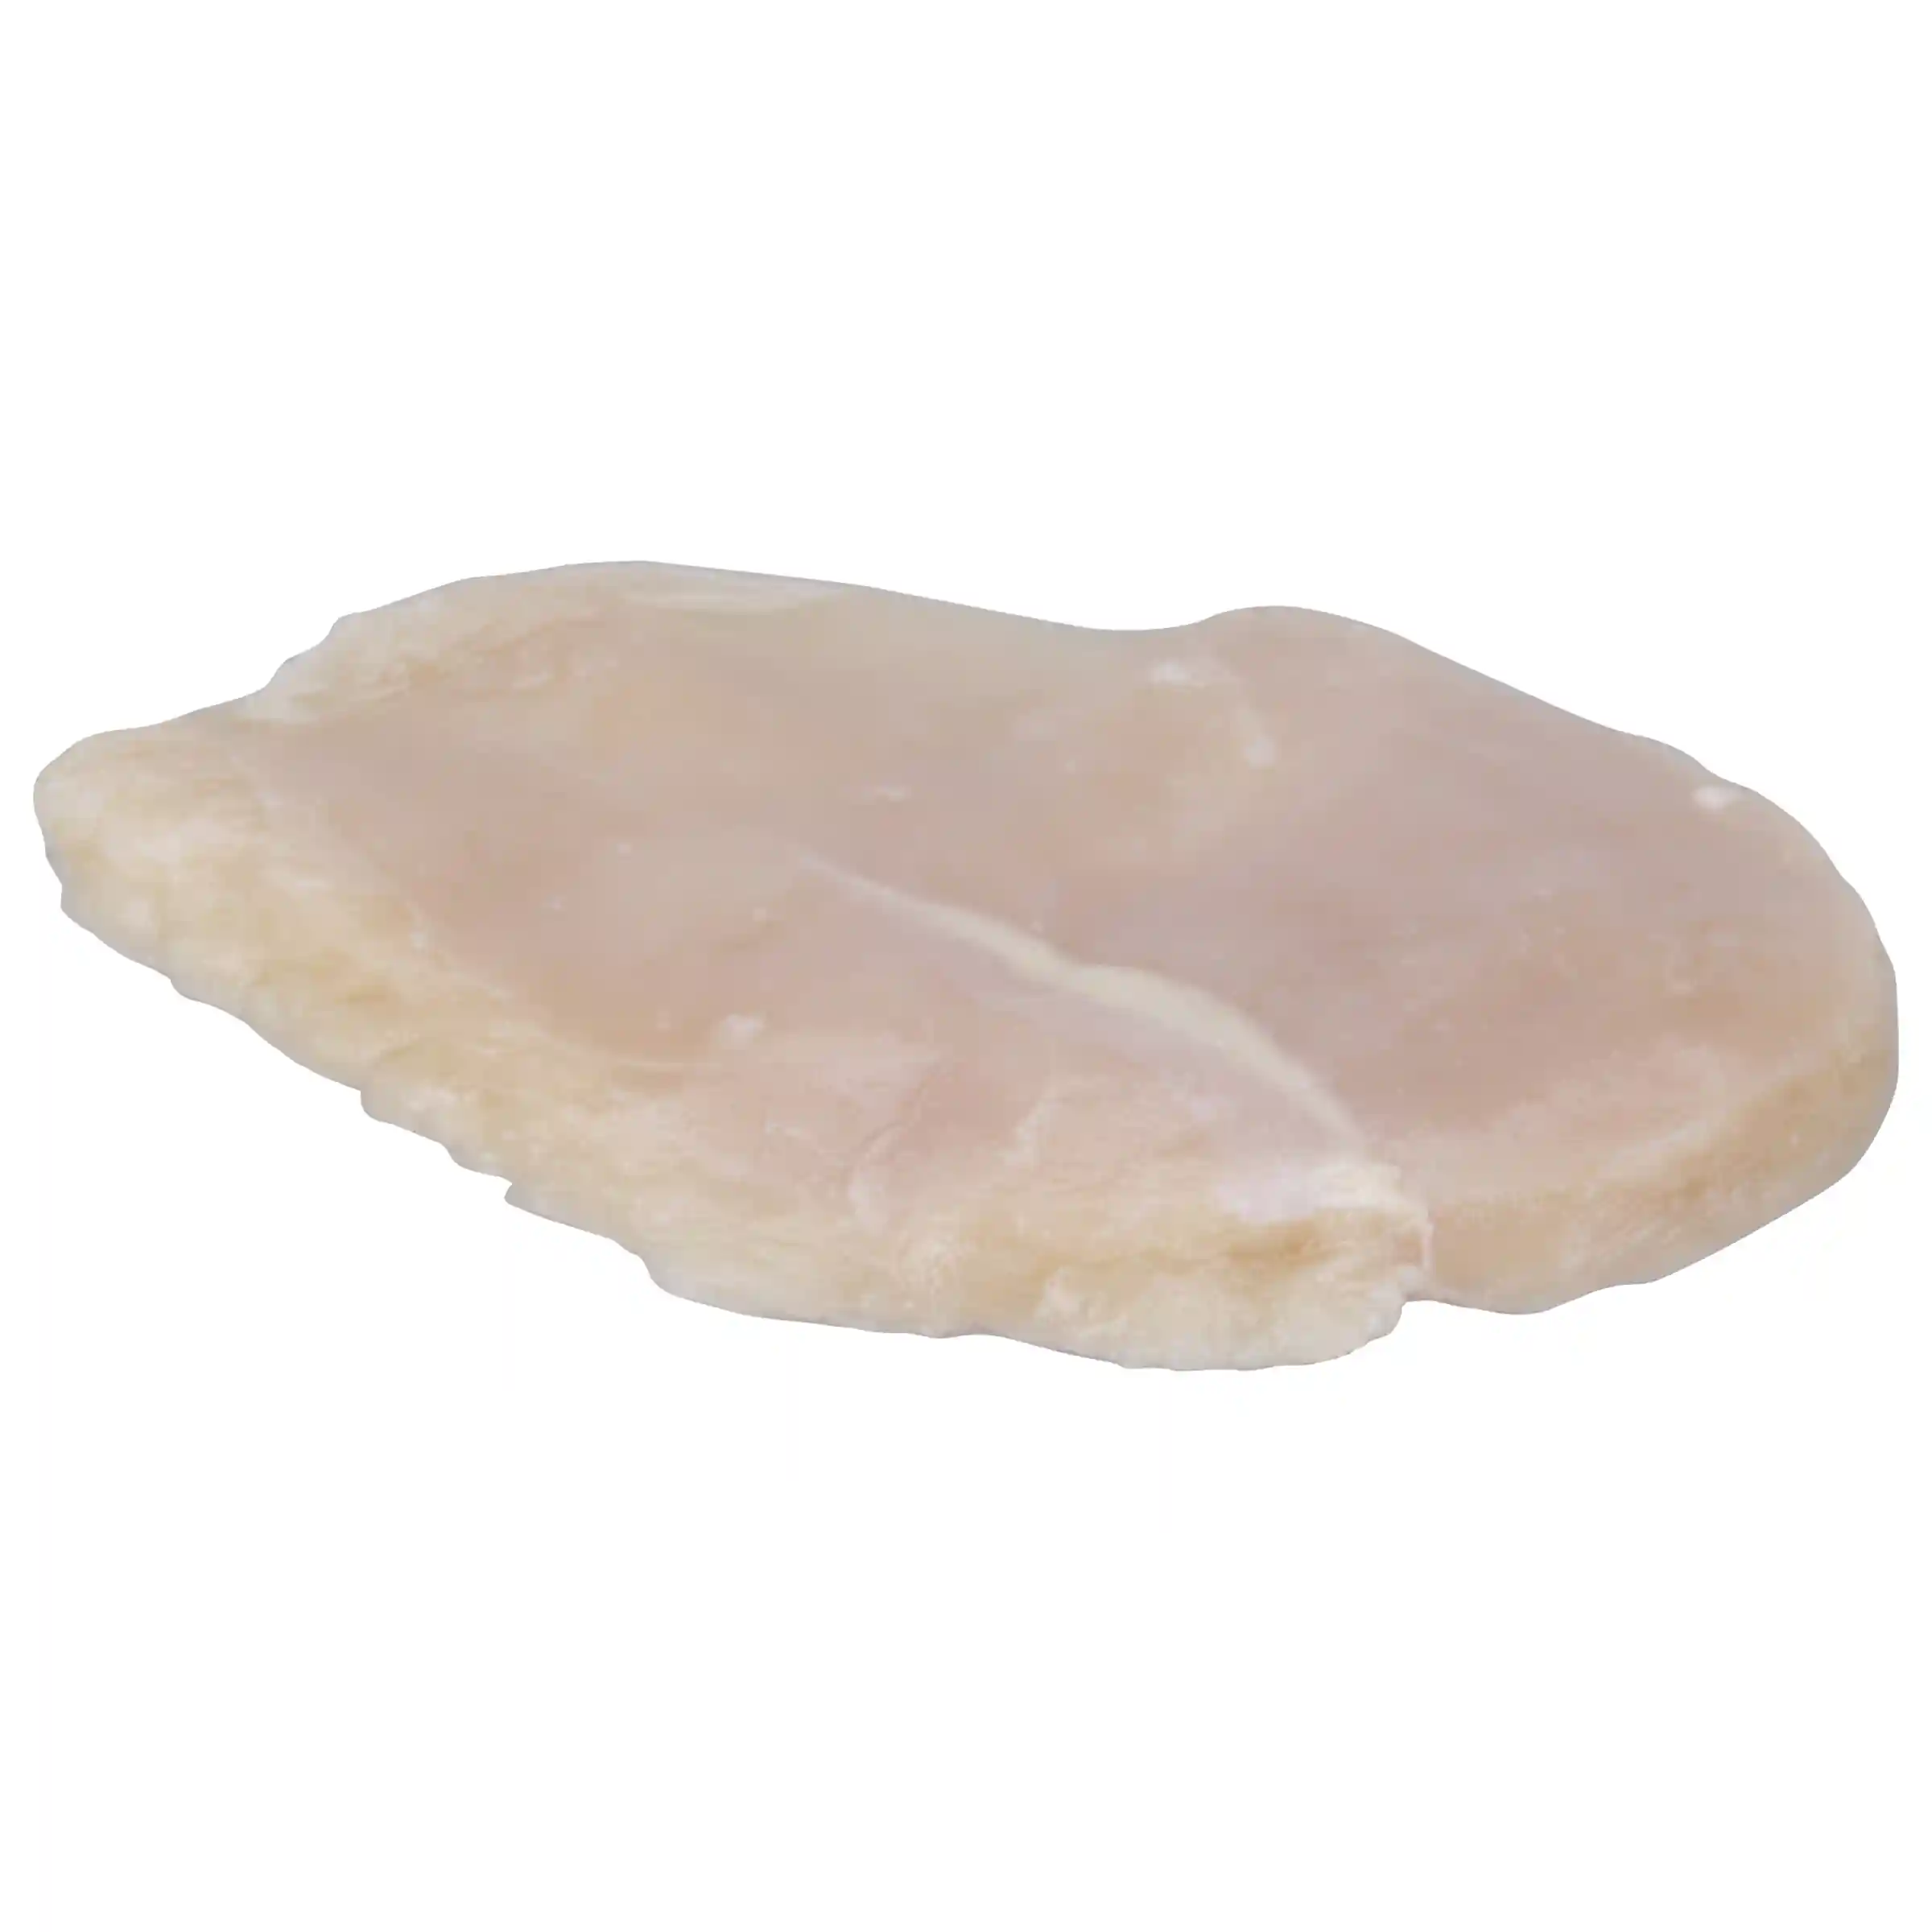  Tyson® Uncooked, Ice Glazed Boneless Skinless Chicken Breast Filets with Rib Meat_image_11